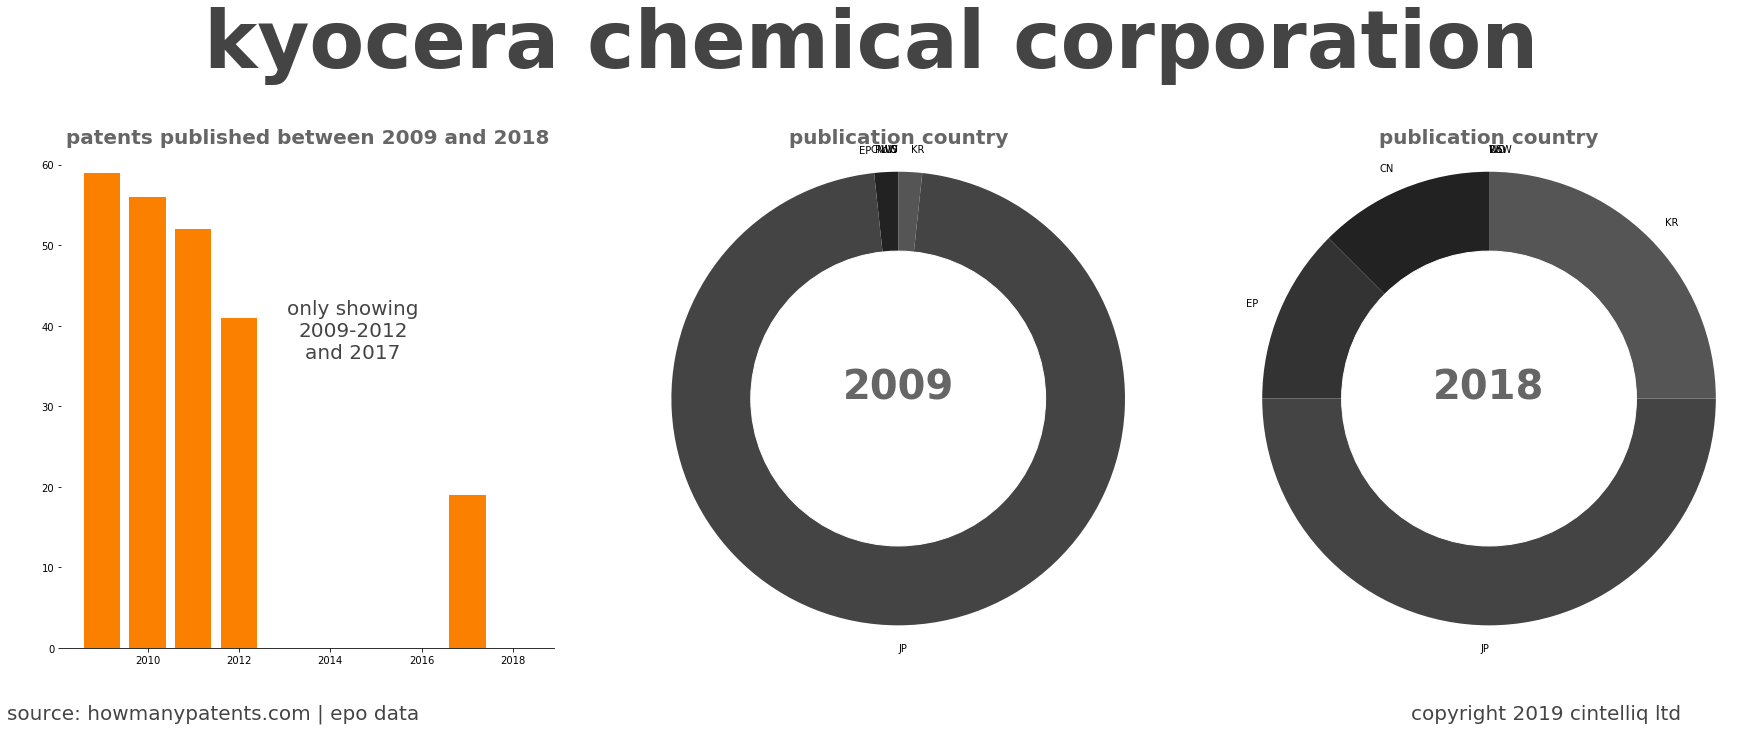 summary of patents for Kyocera Chemical Corporation